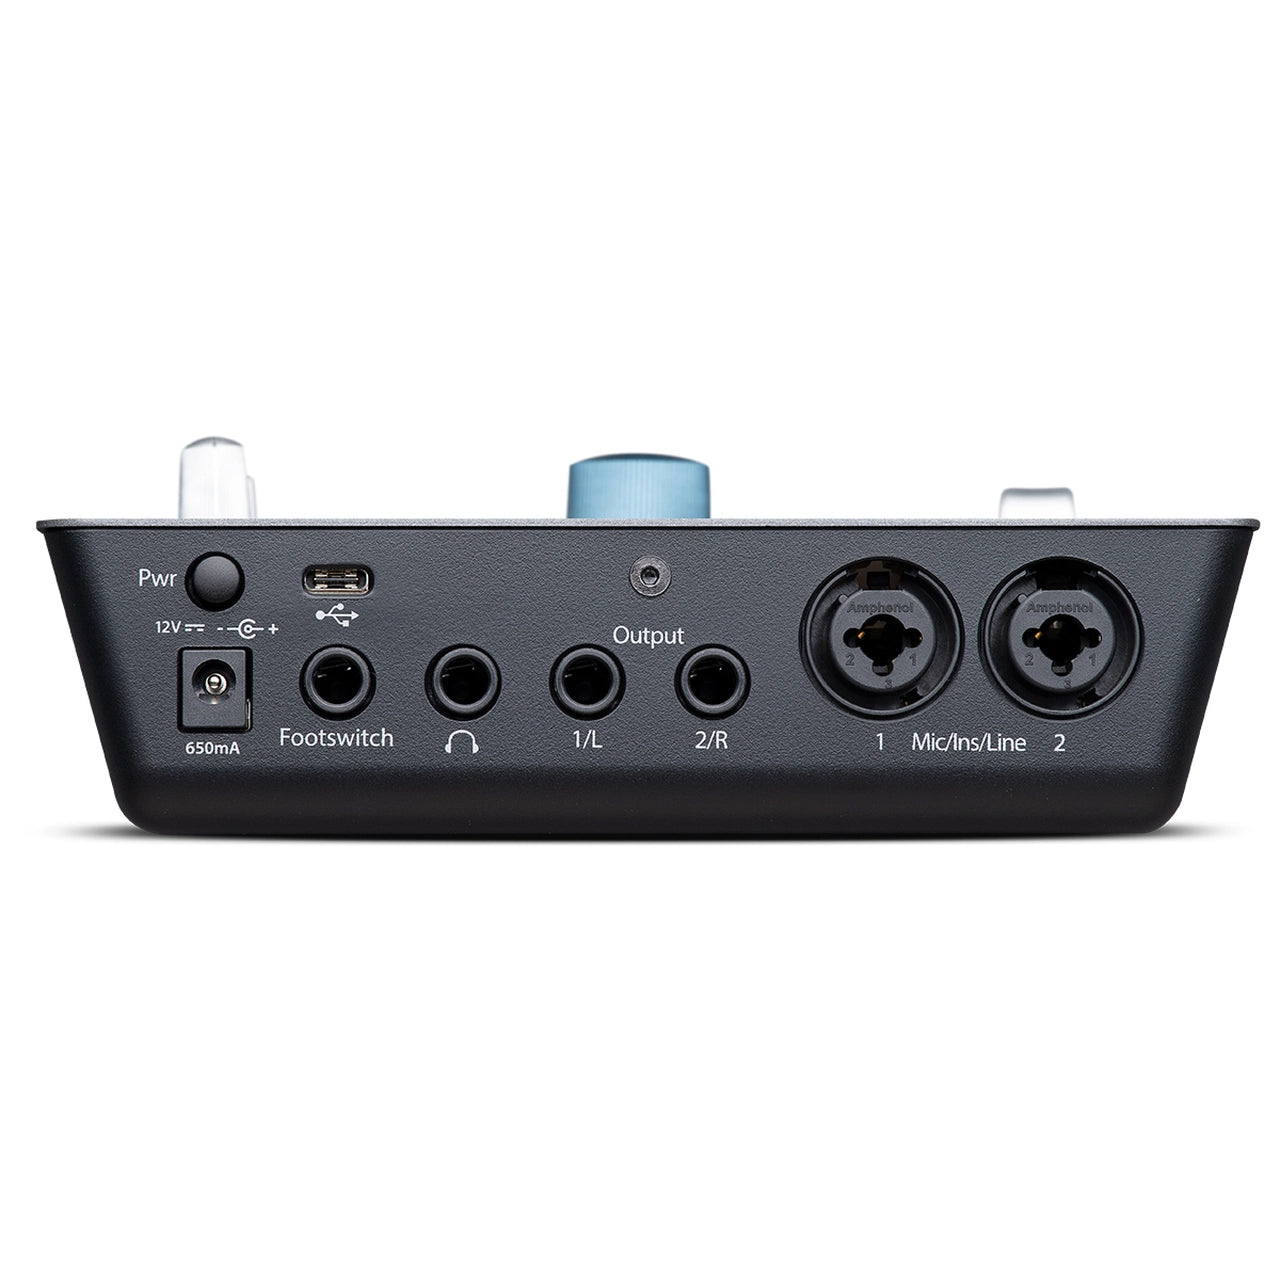 ioSTATION 24c 2x2 USB-C Audio Interface and Production Controller